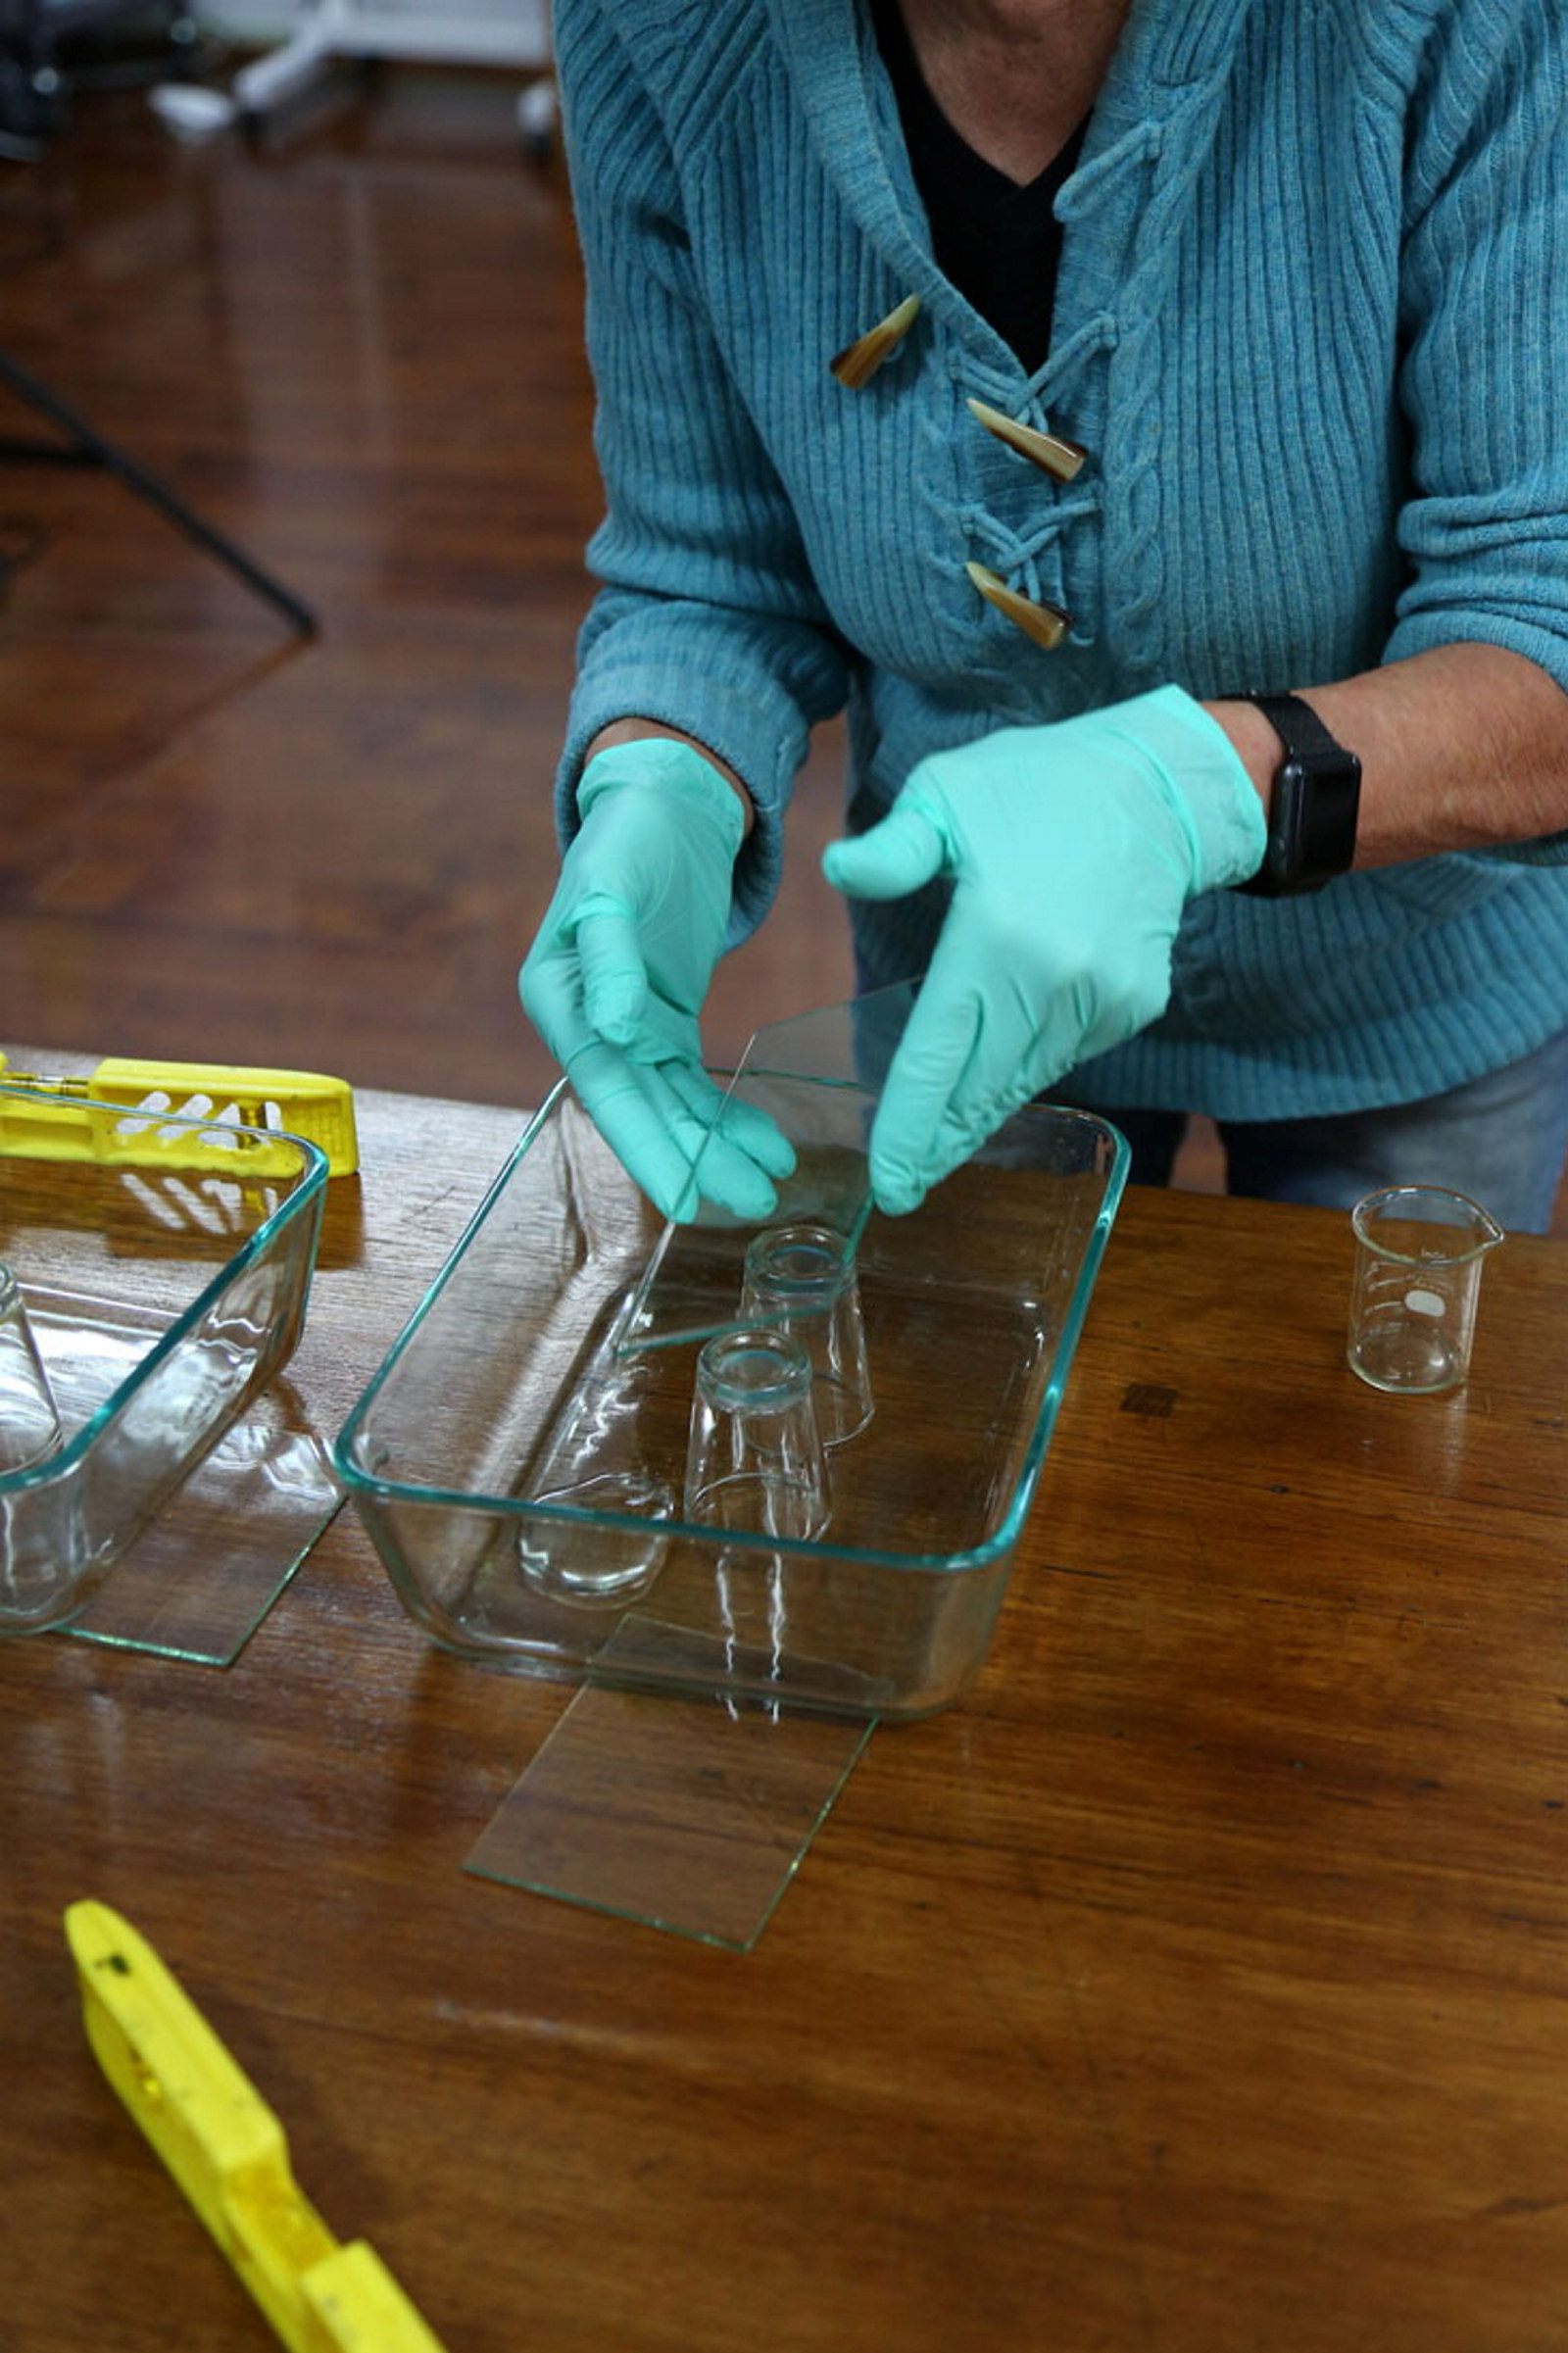 Pair of blue gloved hands working with glass plates.